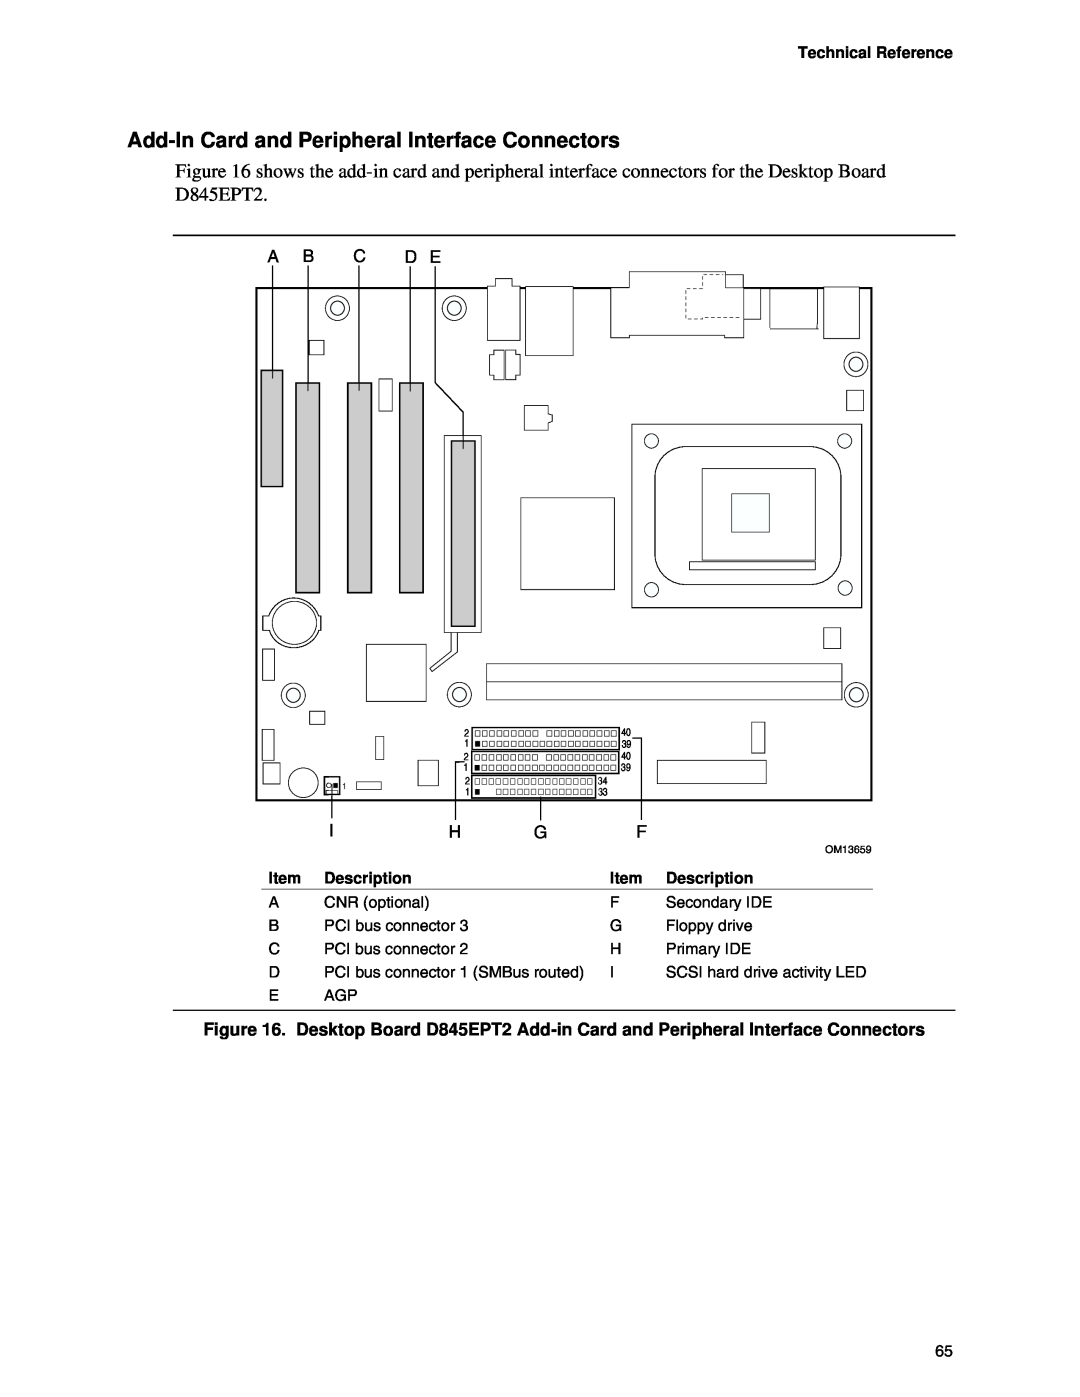 Intel D845EBG2, D845EPT2 manual Add-In Card and Peripheral Interface Connectors, Technical Reference, Description, OM13659 